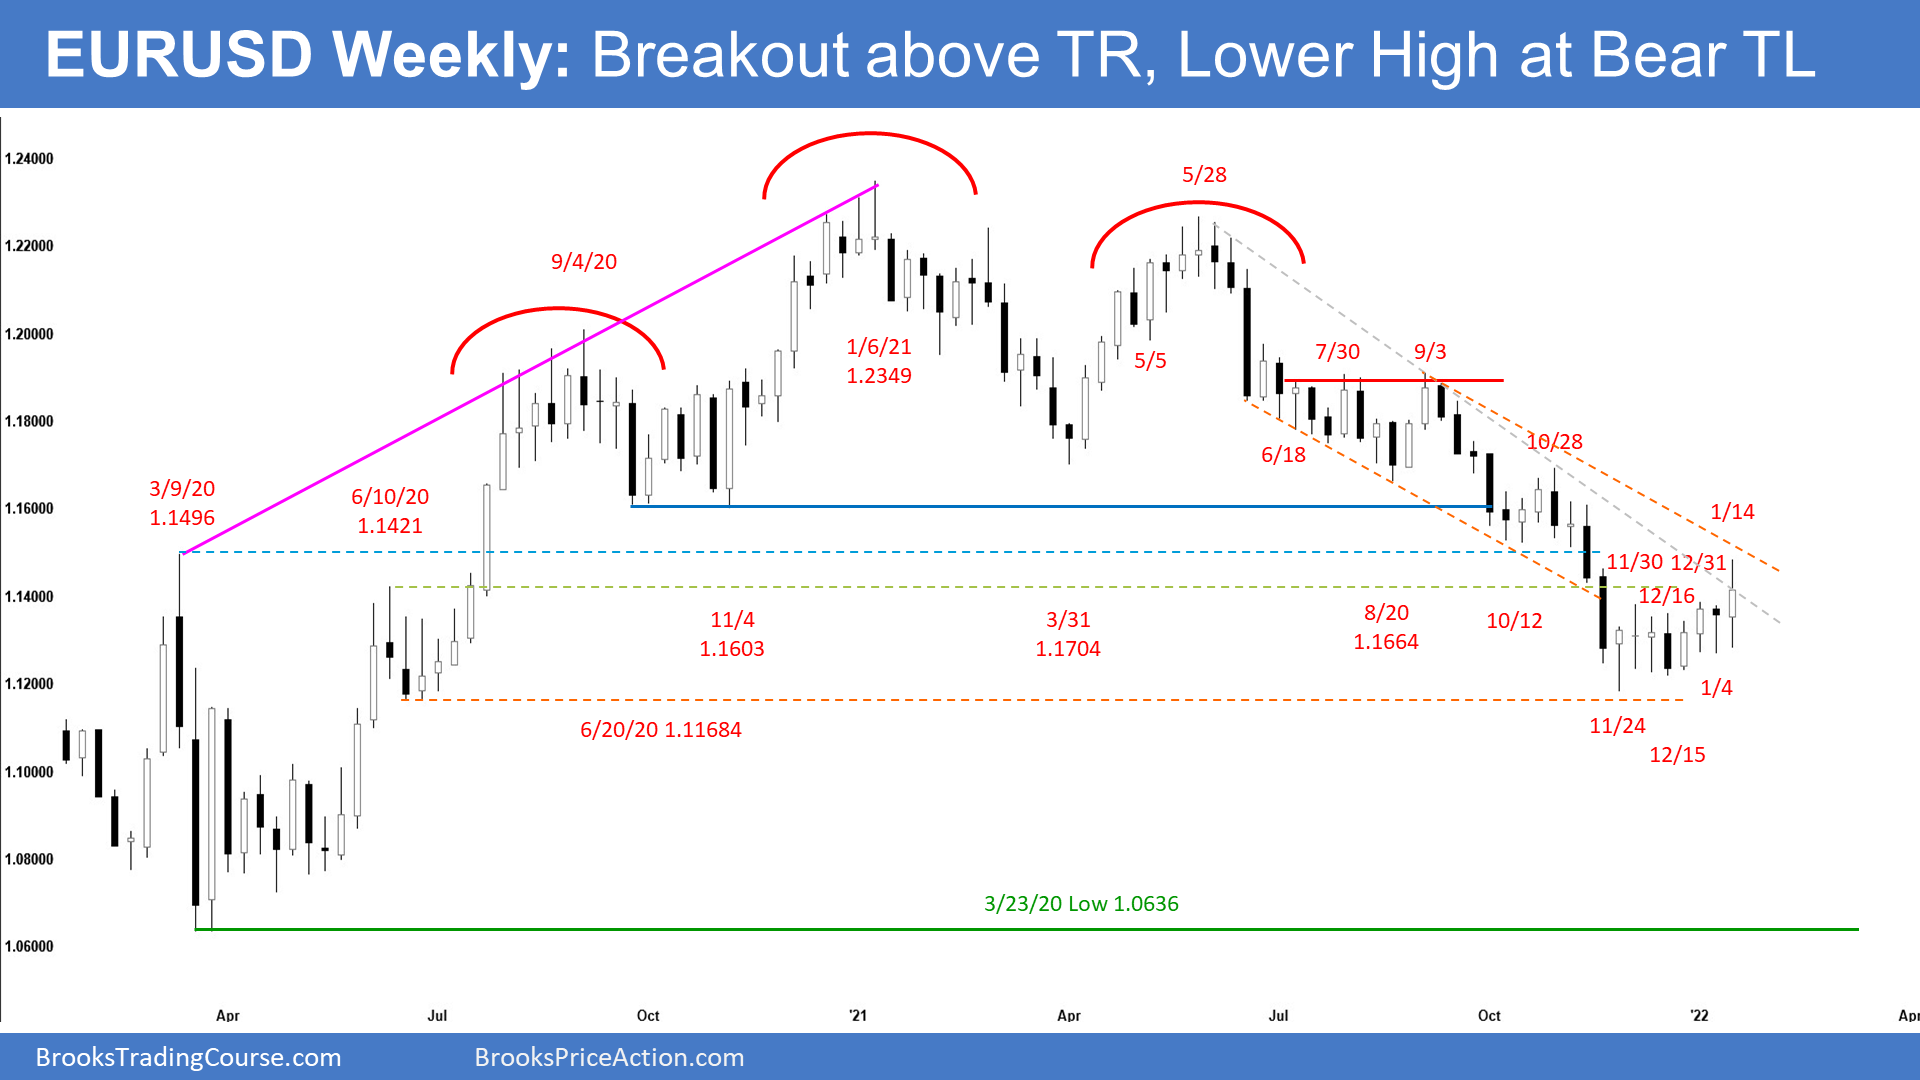 EURUSD Weekly Chart Breakout above TR, Lower High at Bear TL